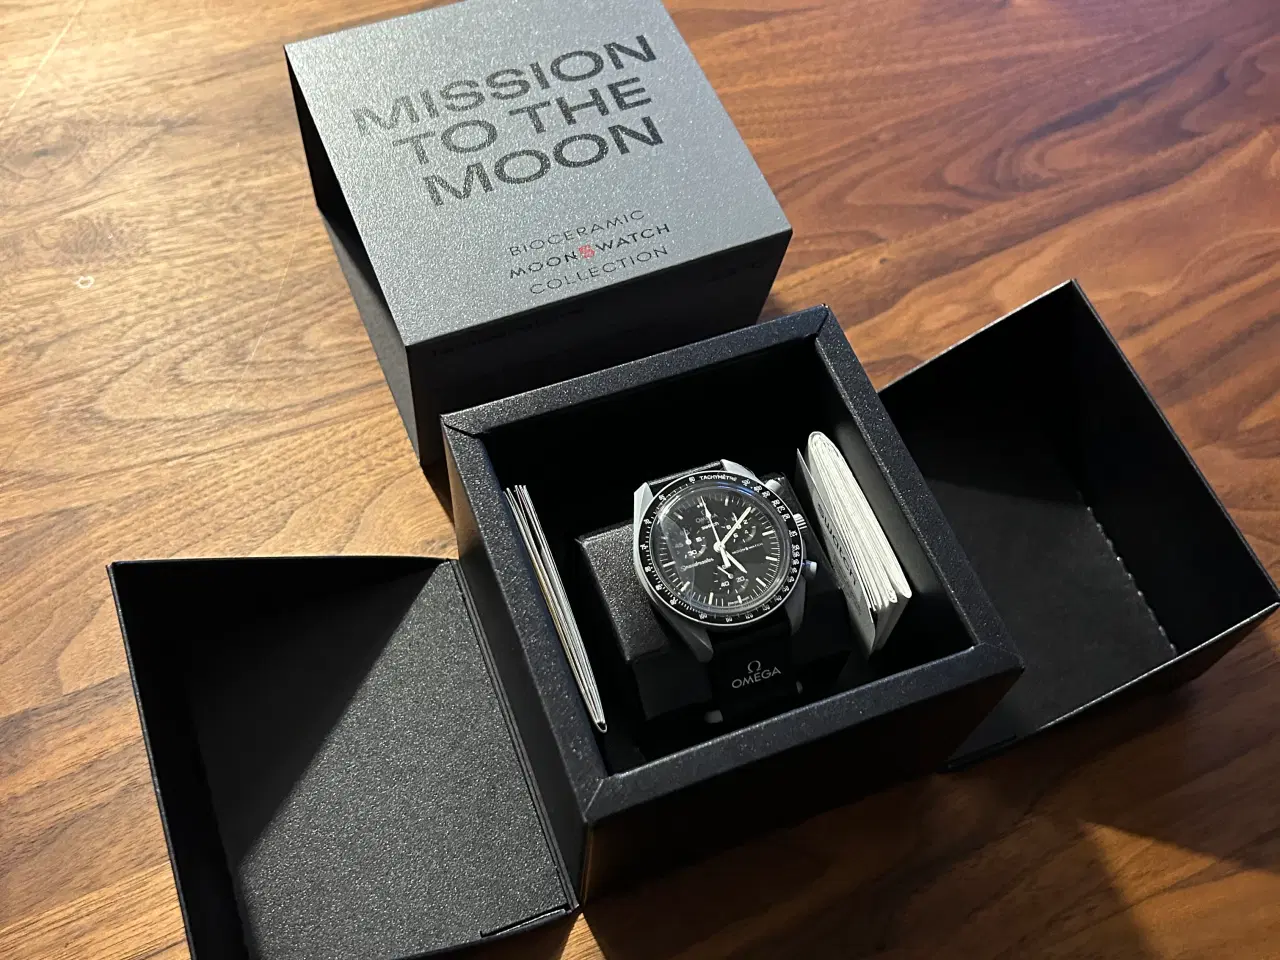 Billede 2 - Omega X Swatch MoonSwatch. Mission to the moon